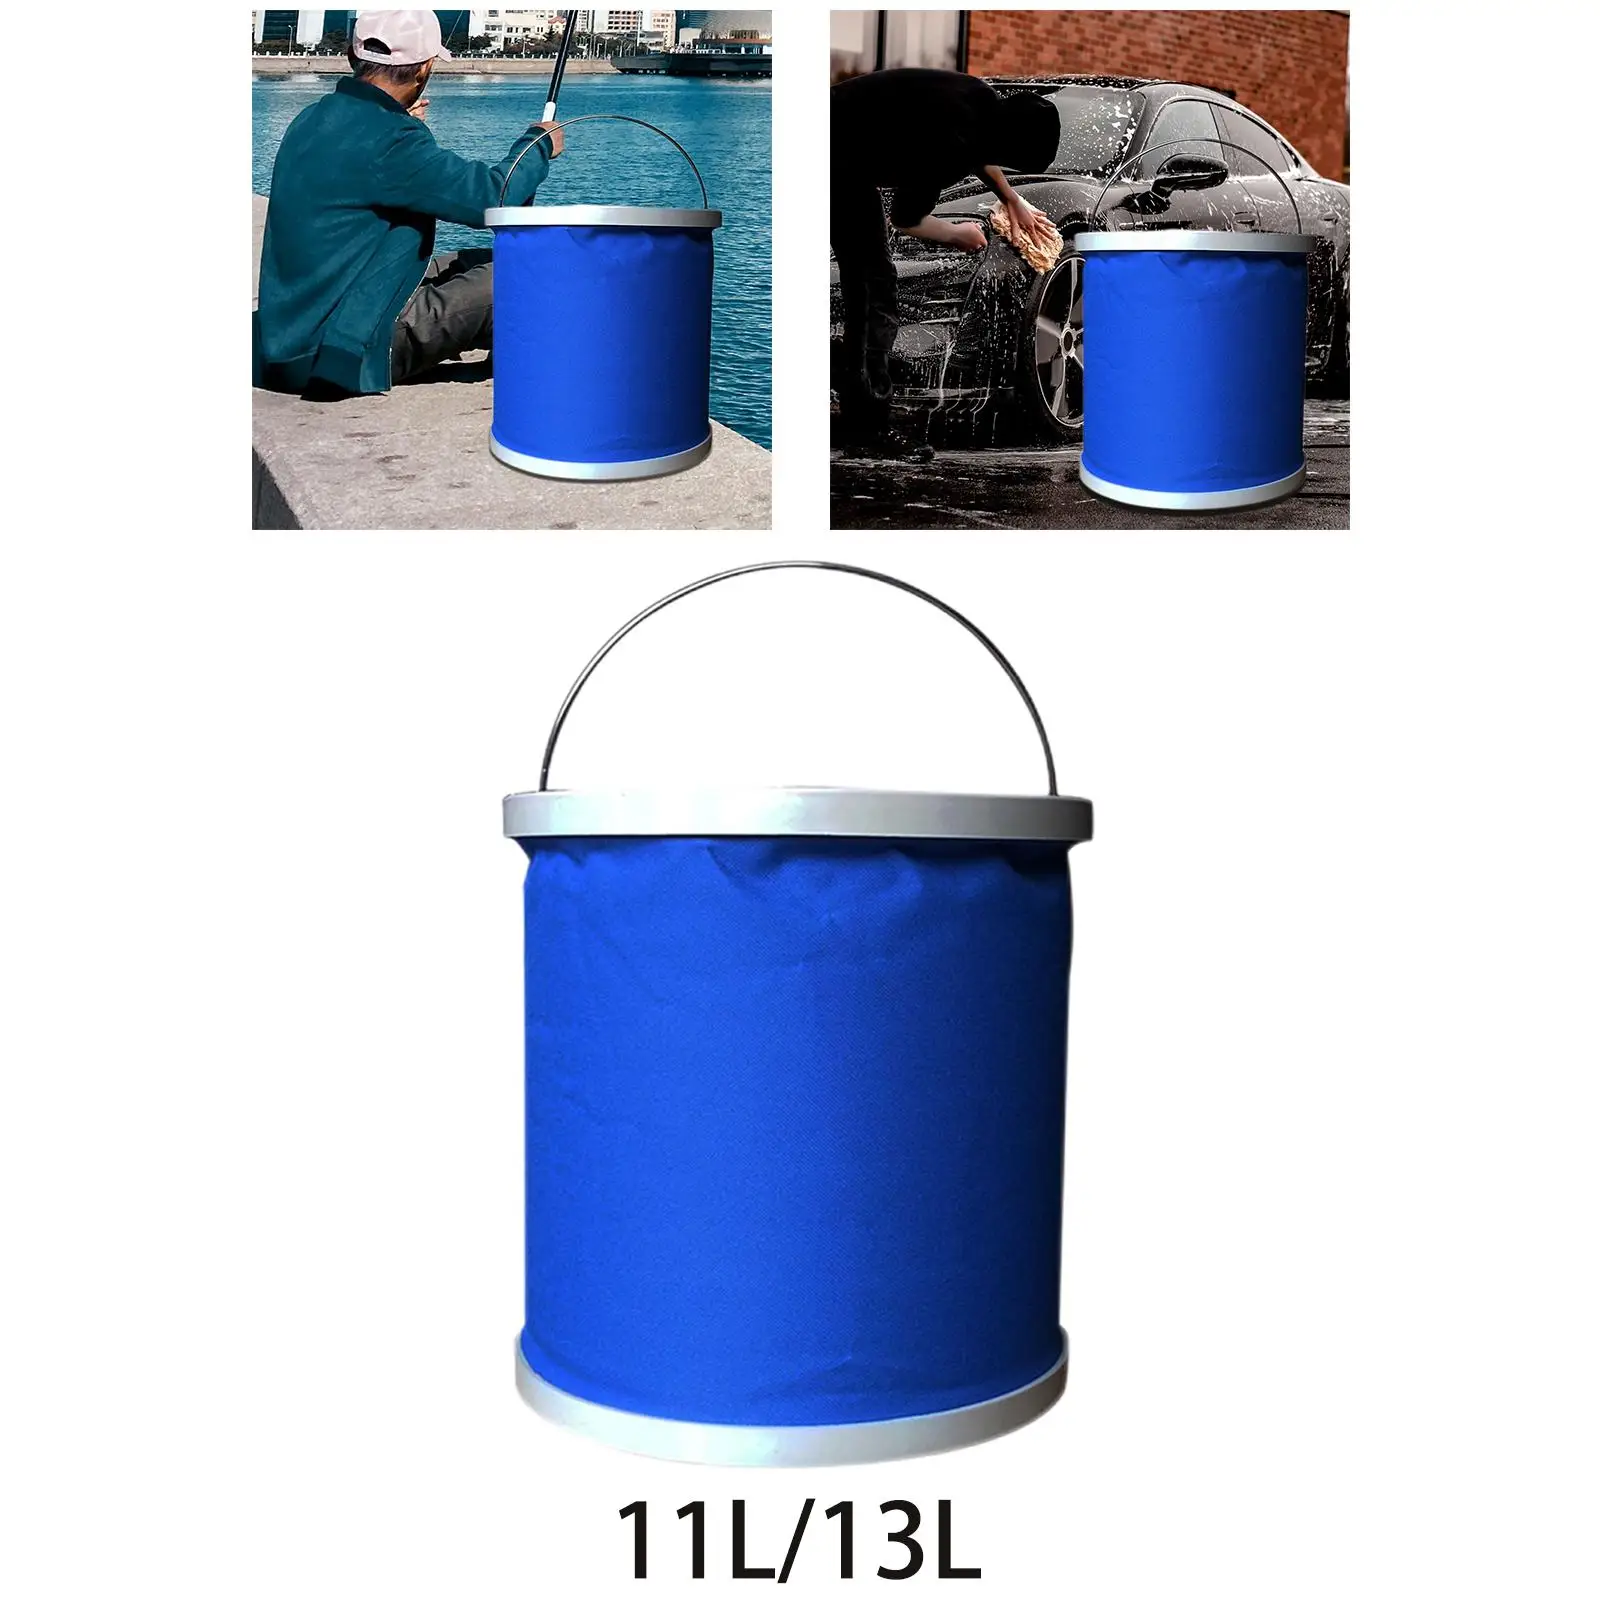 Outdoor Collapsible Bucket Car Trash Cans Carrier for Gardening Traveling